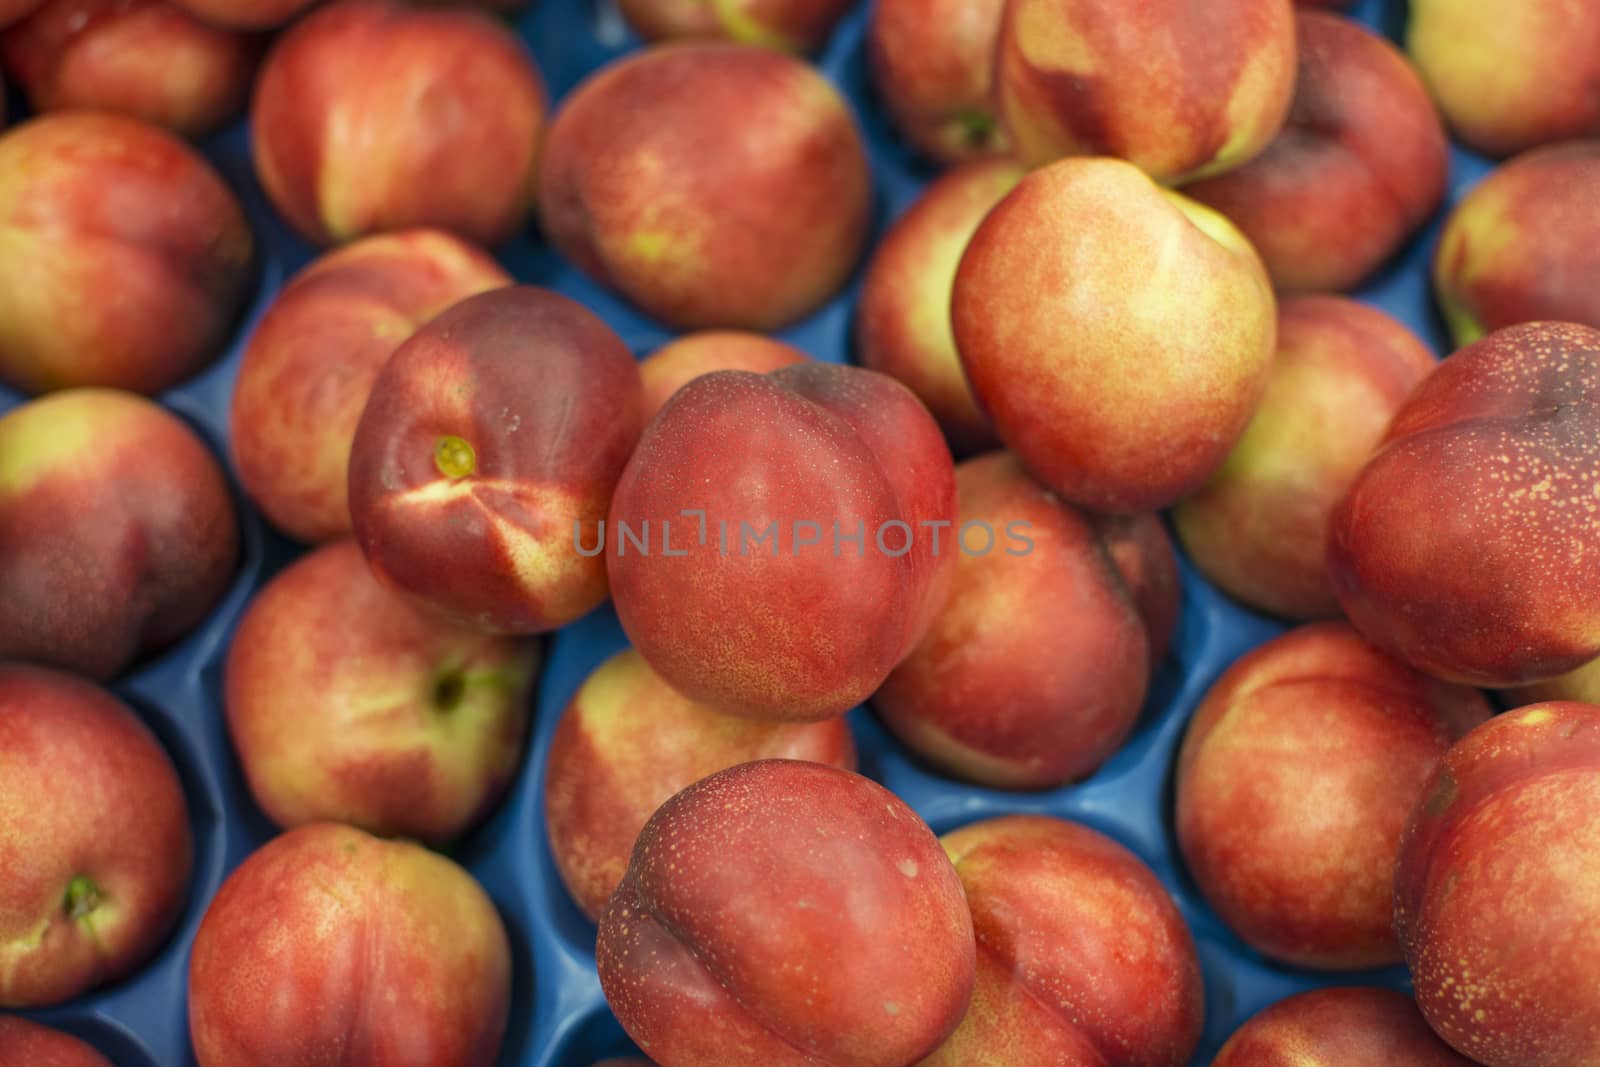 Nectarine is known as the hairless state of peach. Sold in the market. It is juicy and sweet compared to peach nectar.